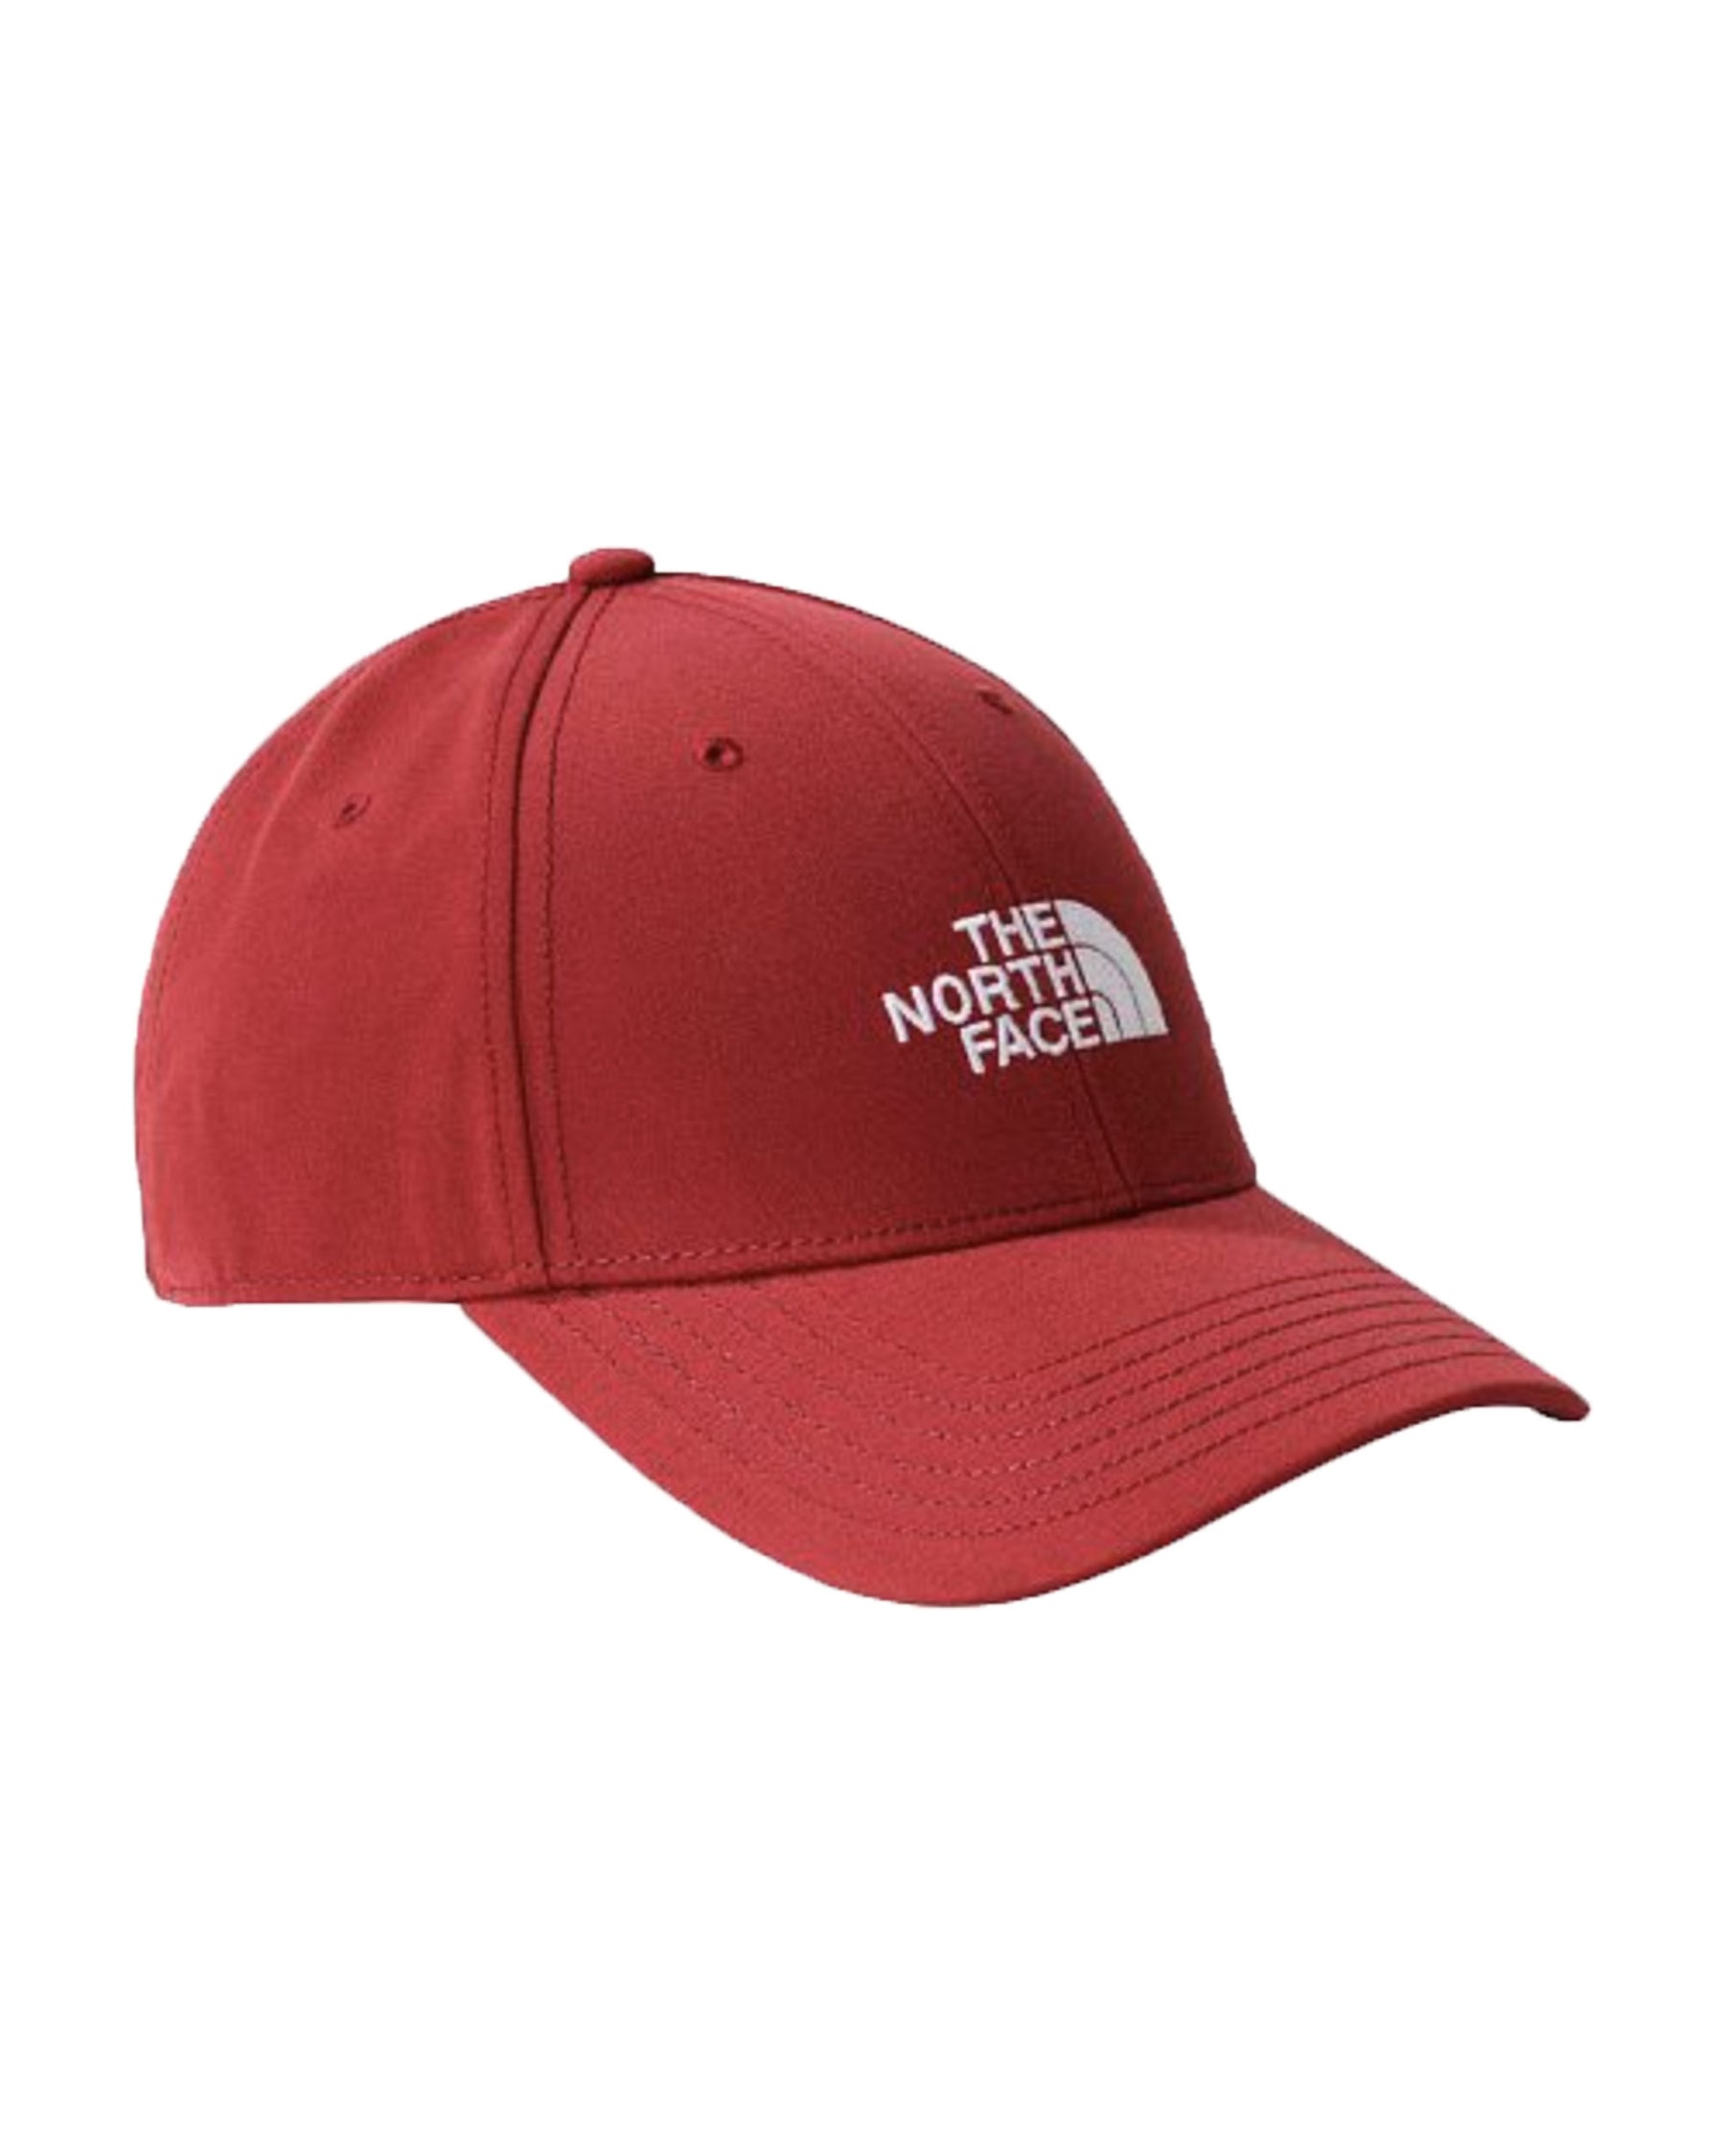 The North Face Recycled 66 Classic Hat Cordovan